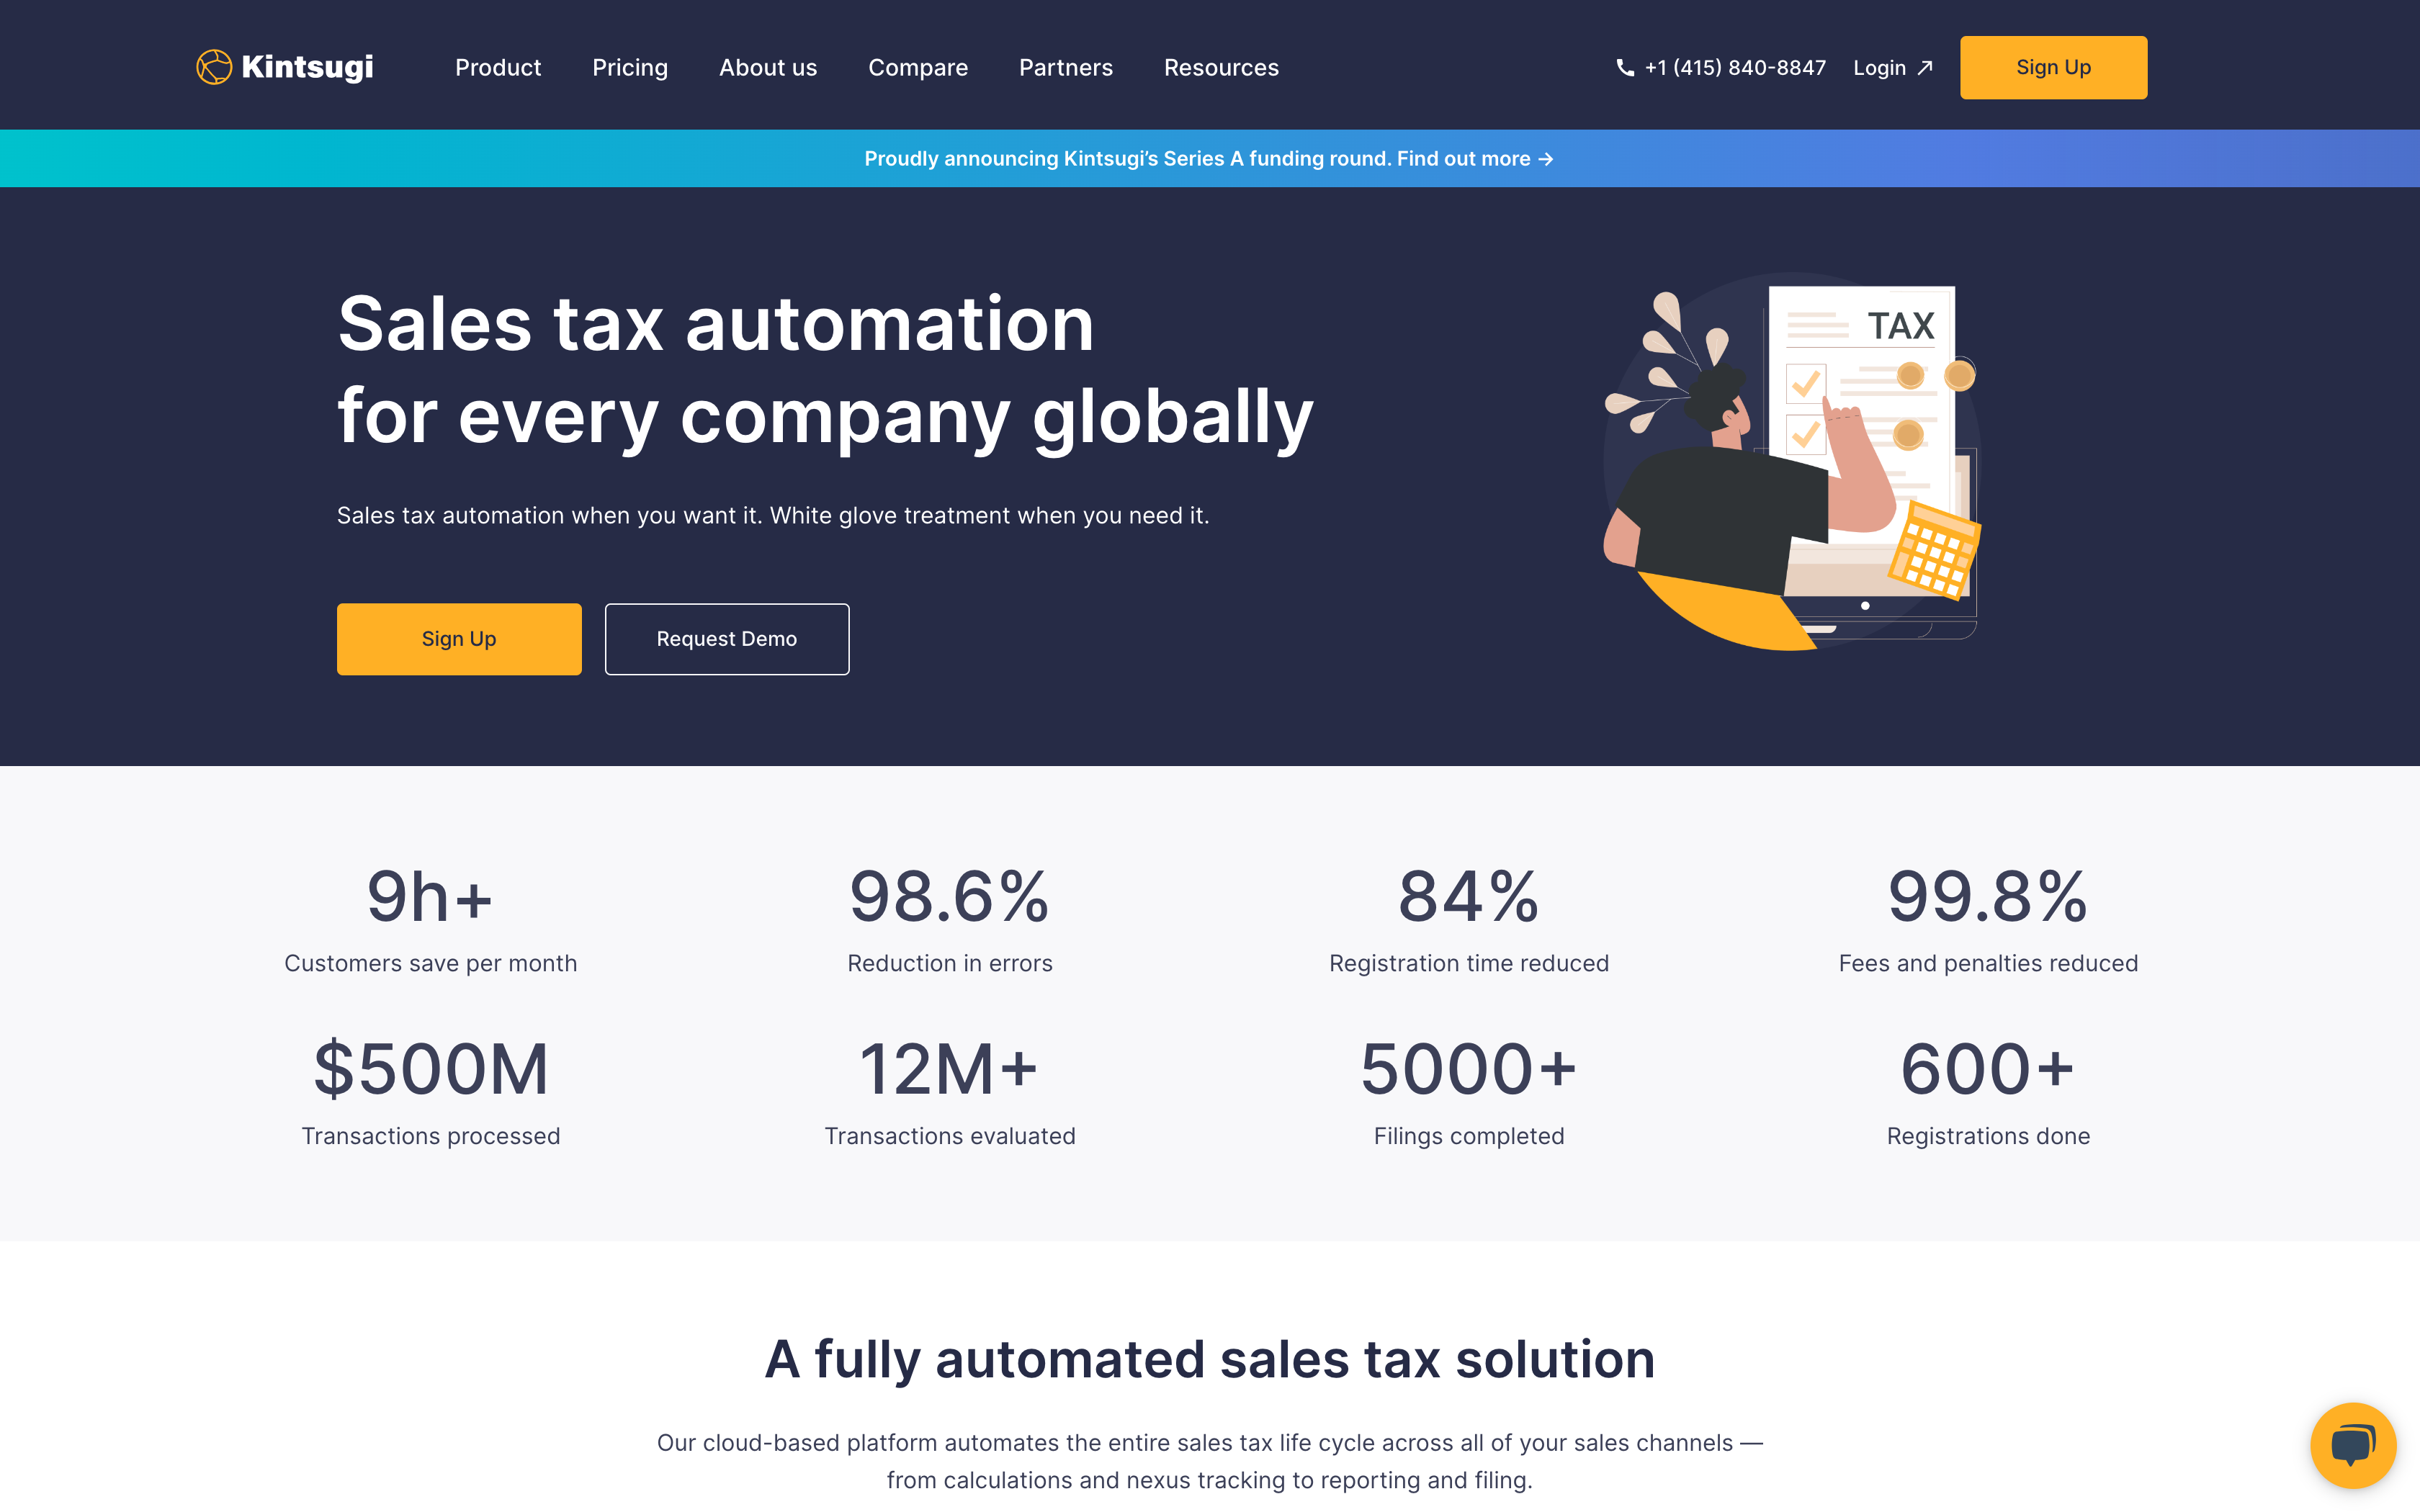 Simplify Sales Tax with Smart AI Automation